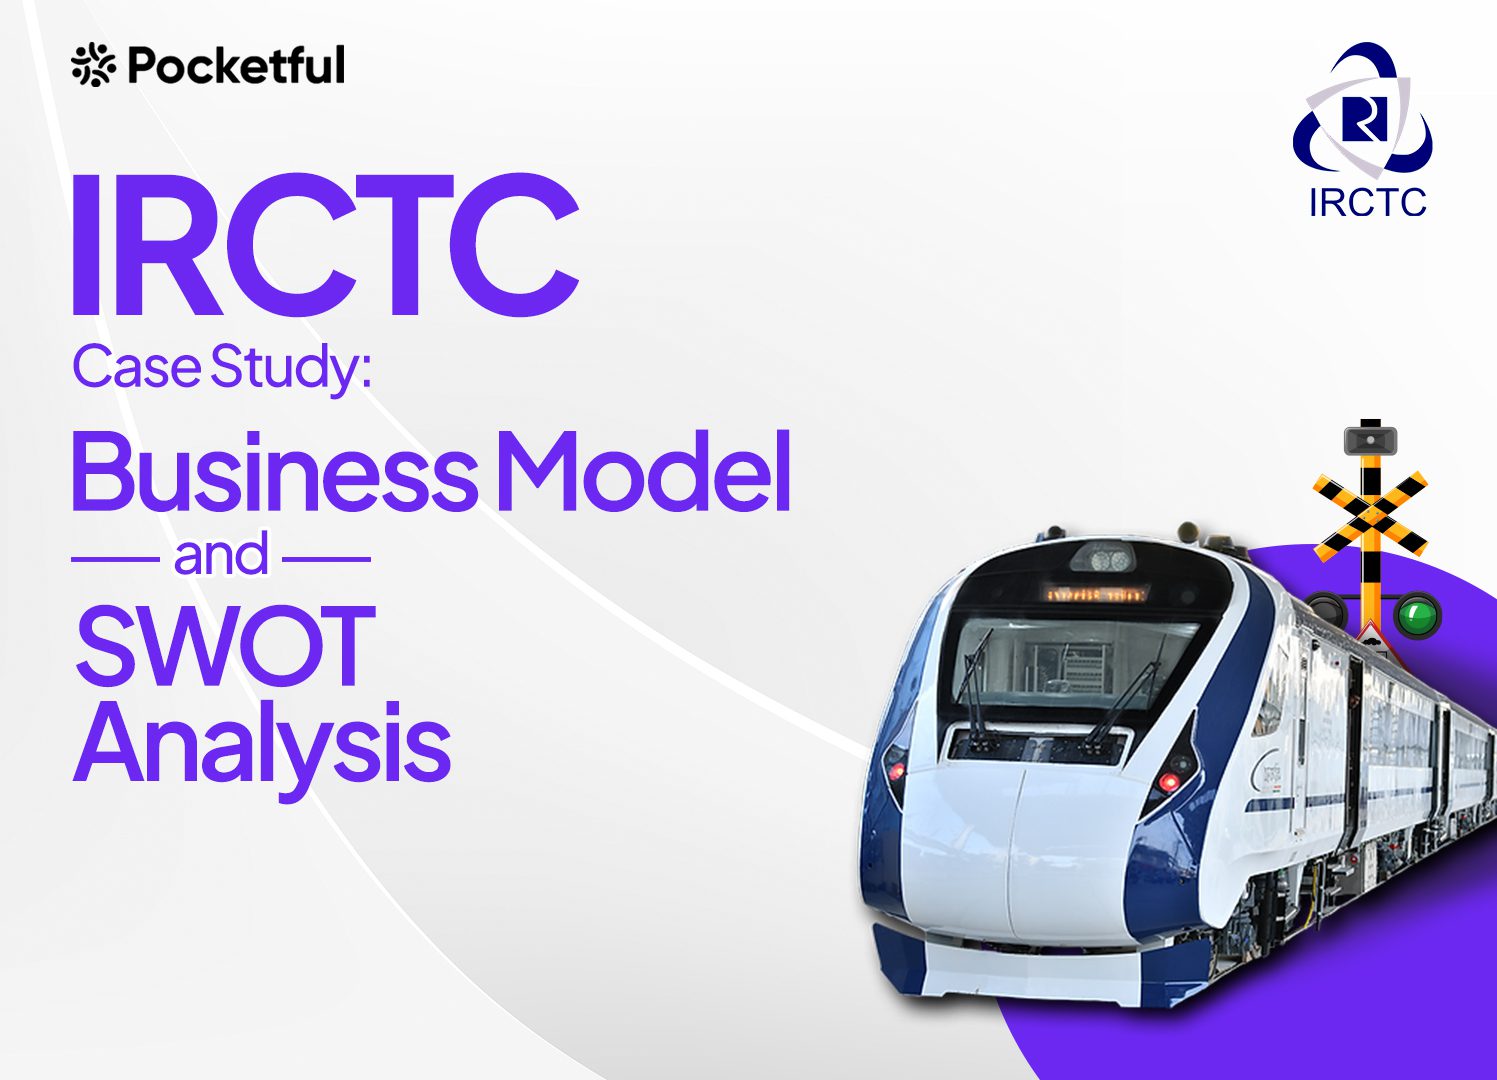 IRCTC Case Study: Business Model, Financials, and SWOT Analysis